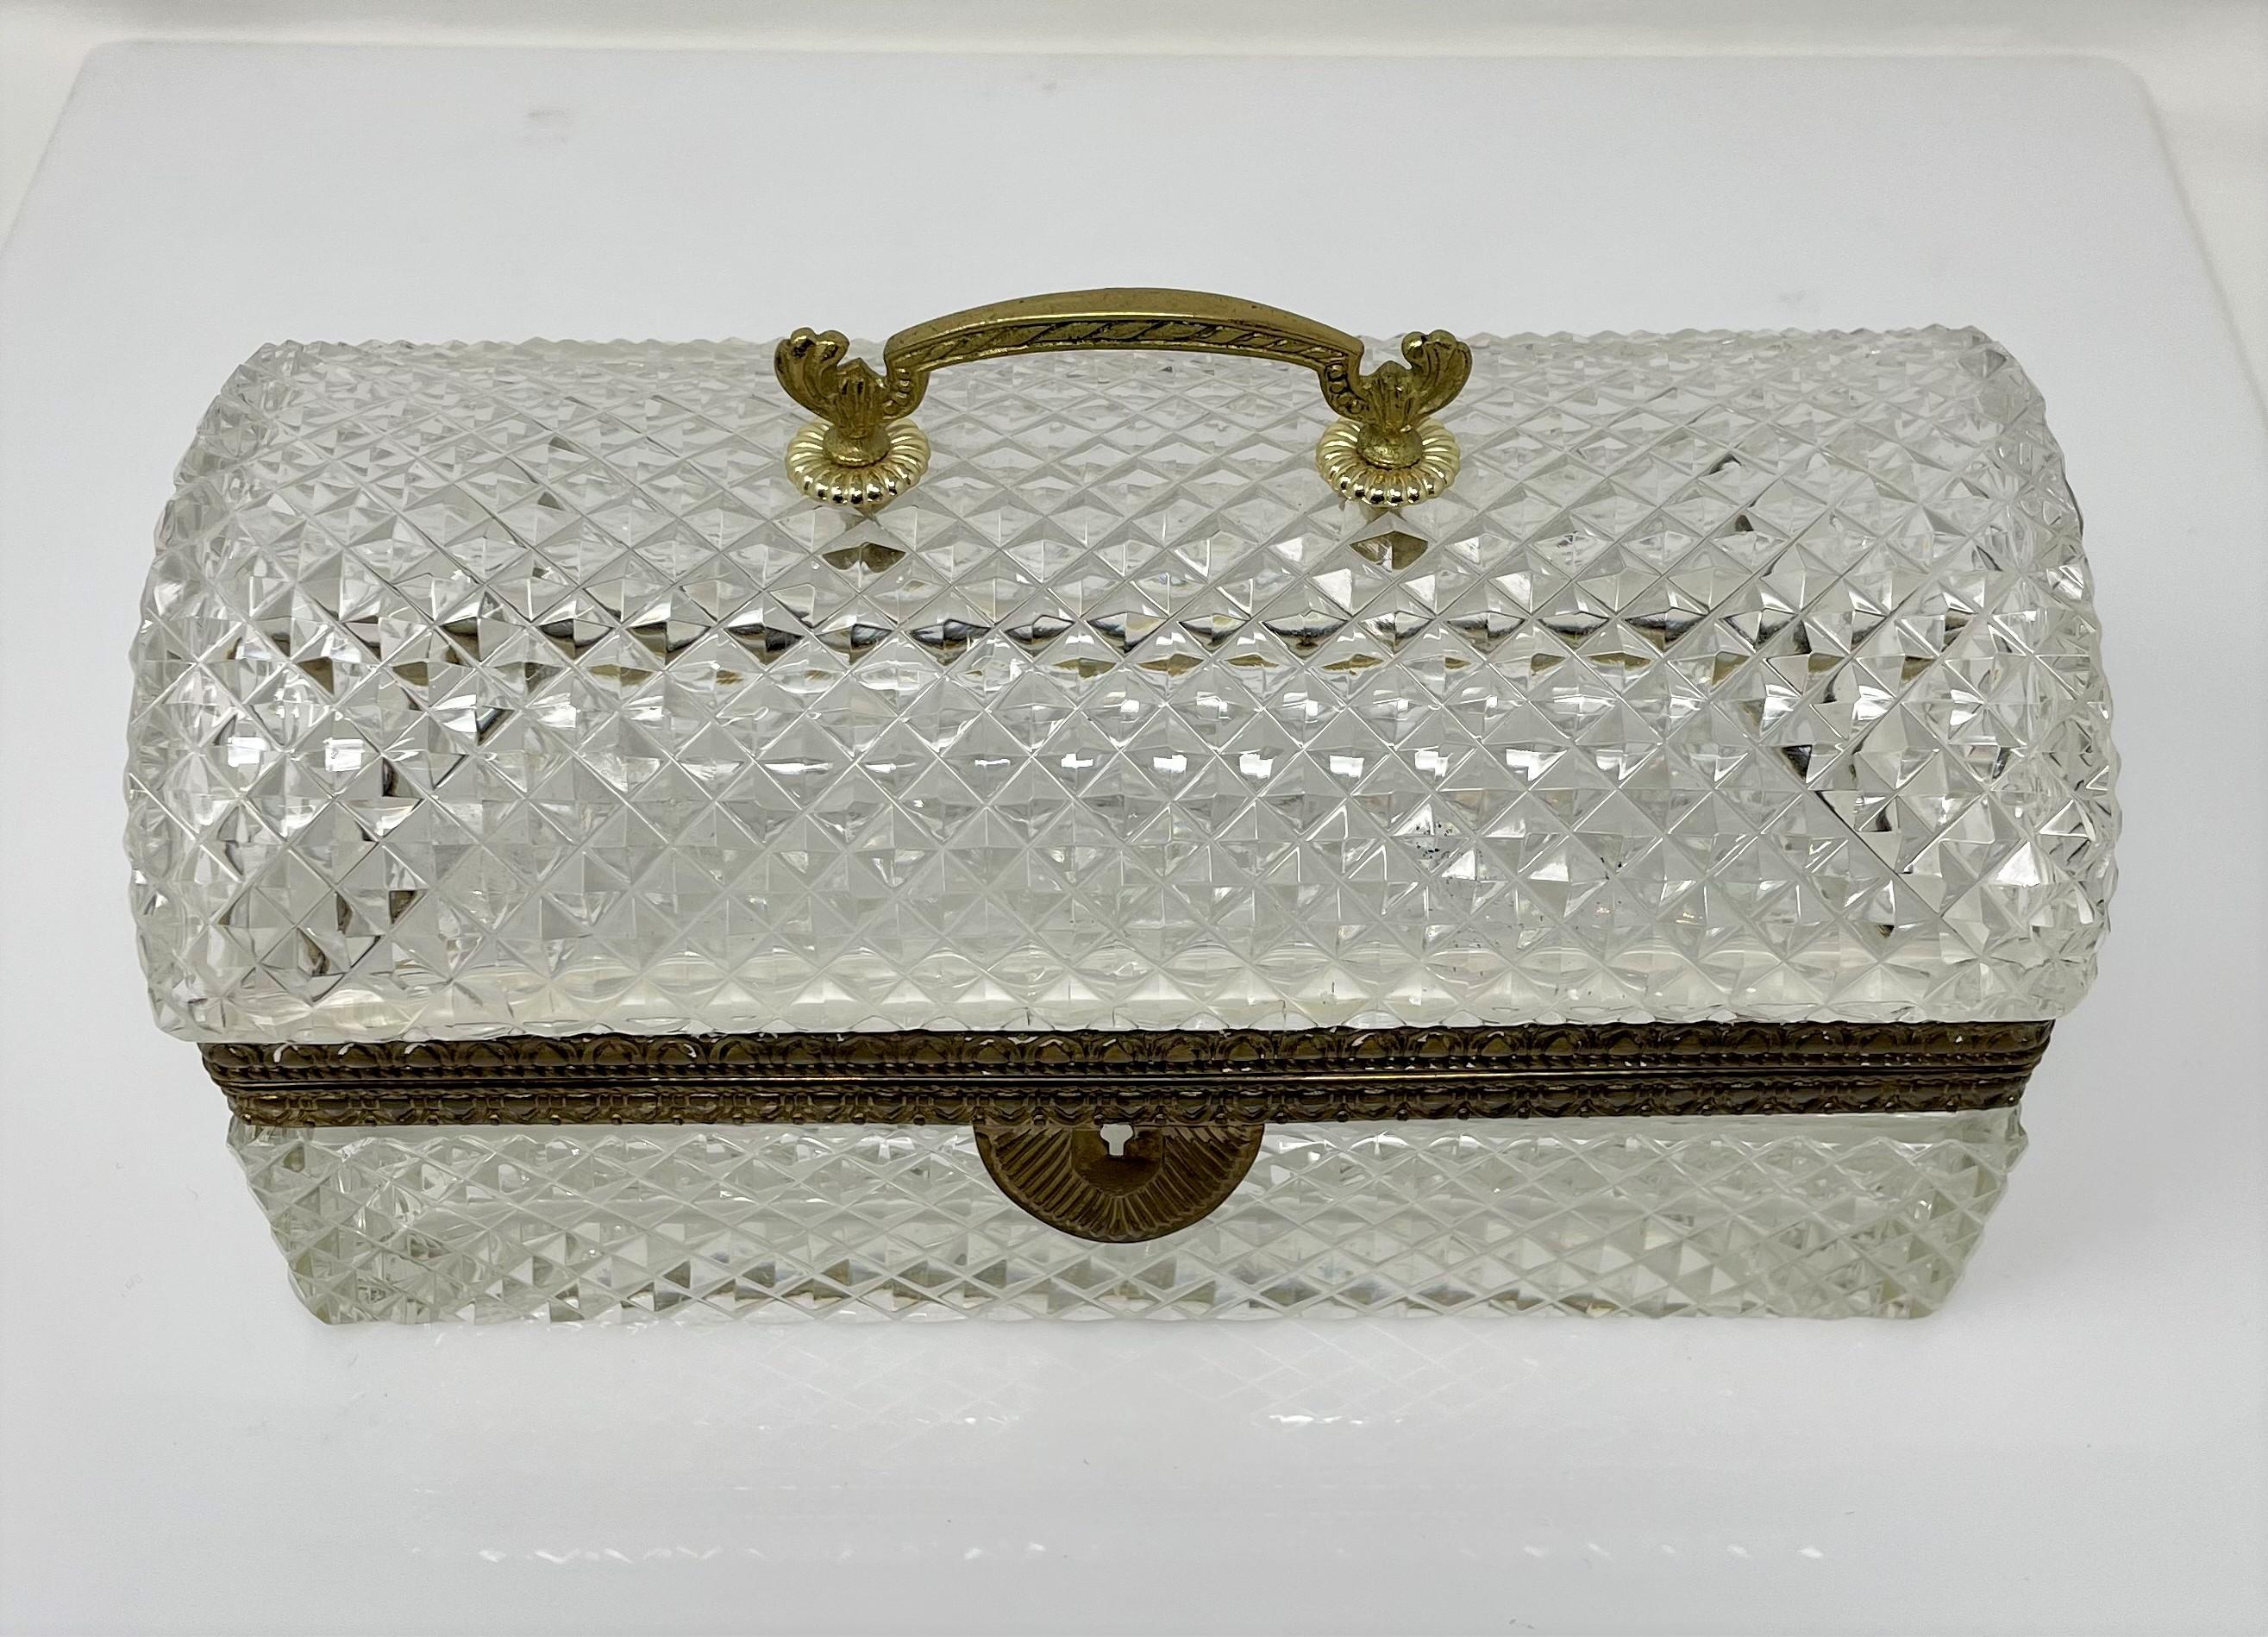 Antique French cut crystal jewel box with bronze d'ore mounts, Circa 1900-1920. 
Rectangular-shaped, referred to as a 